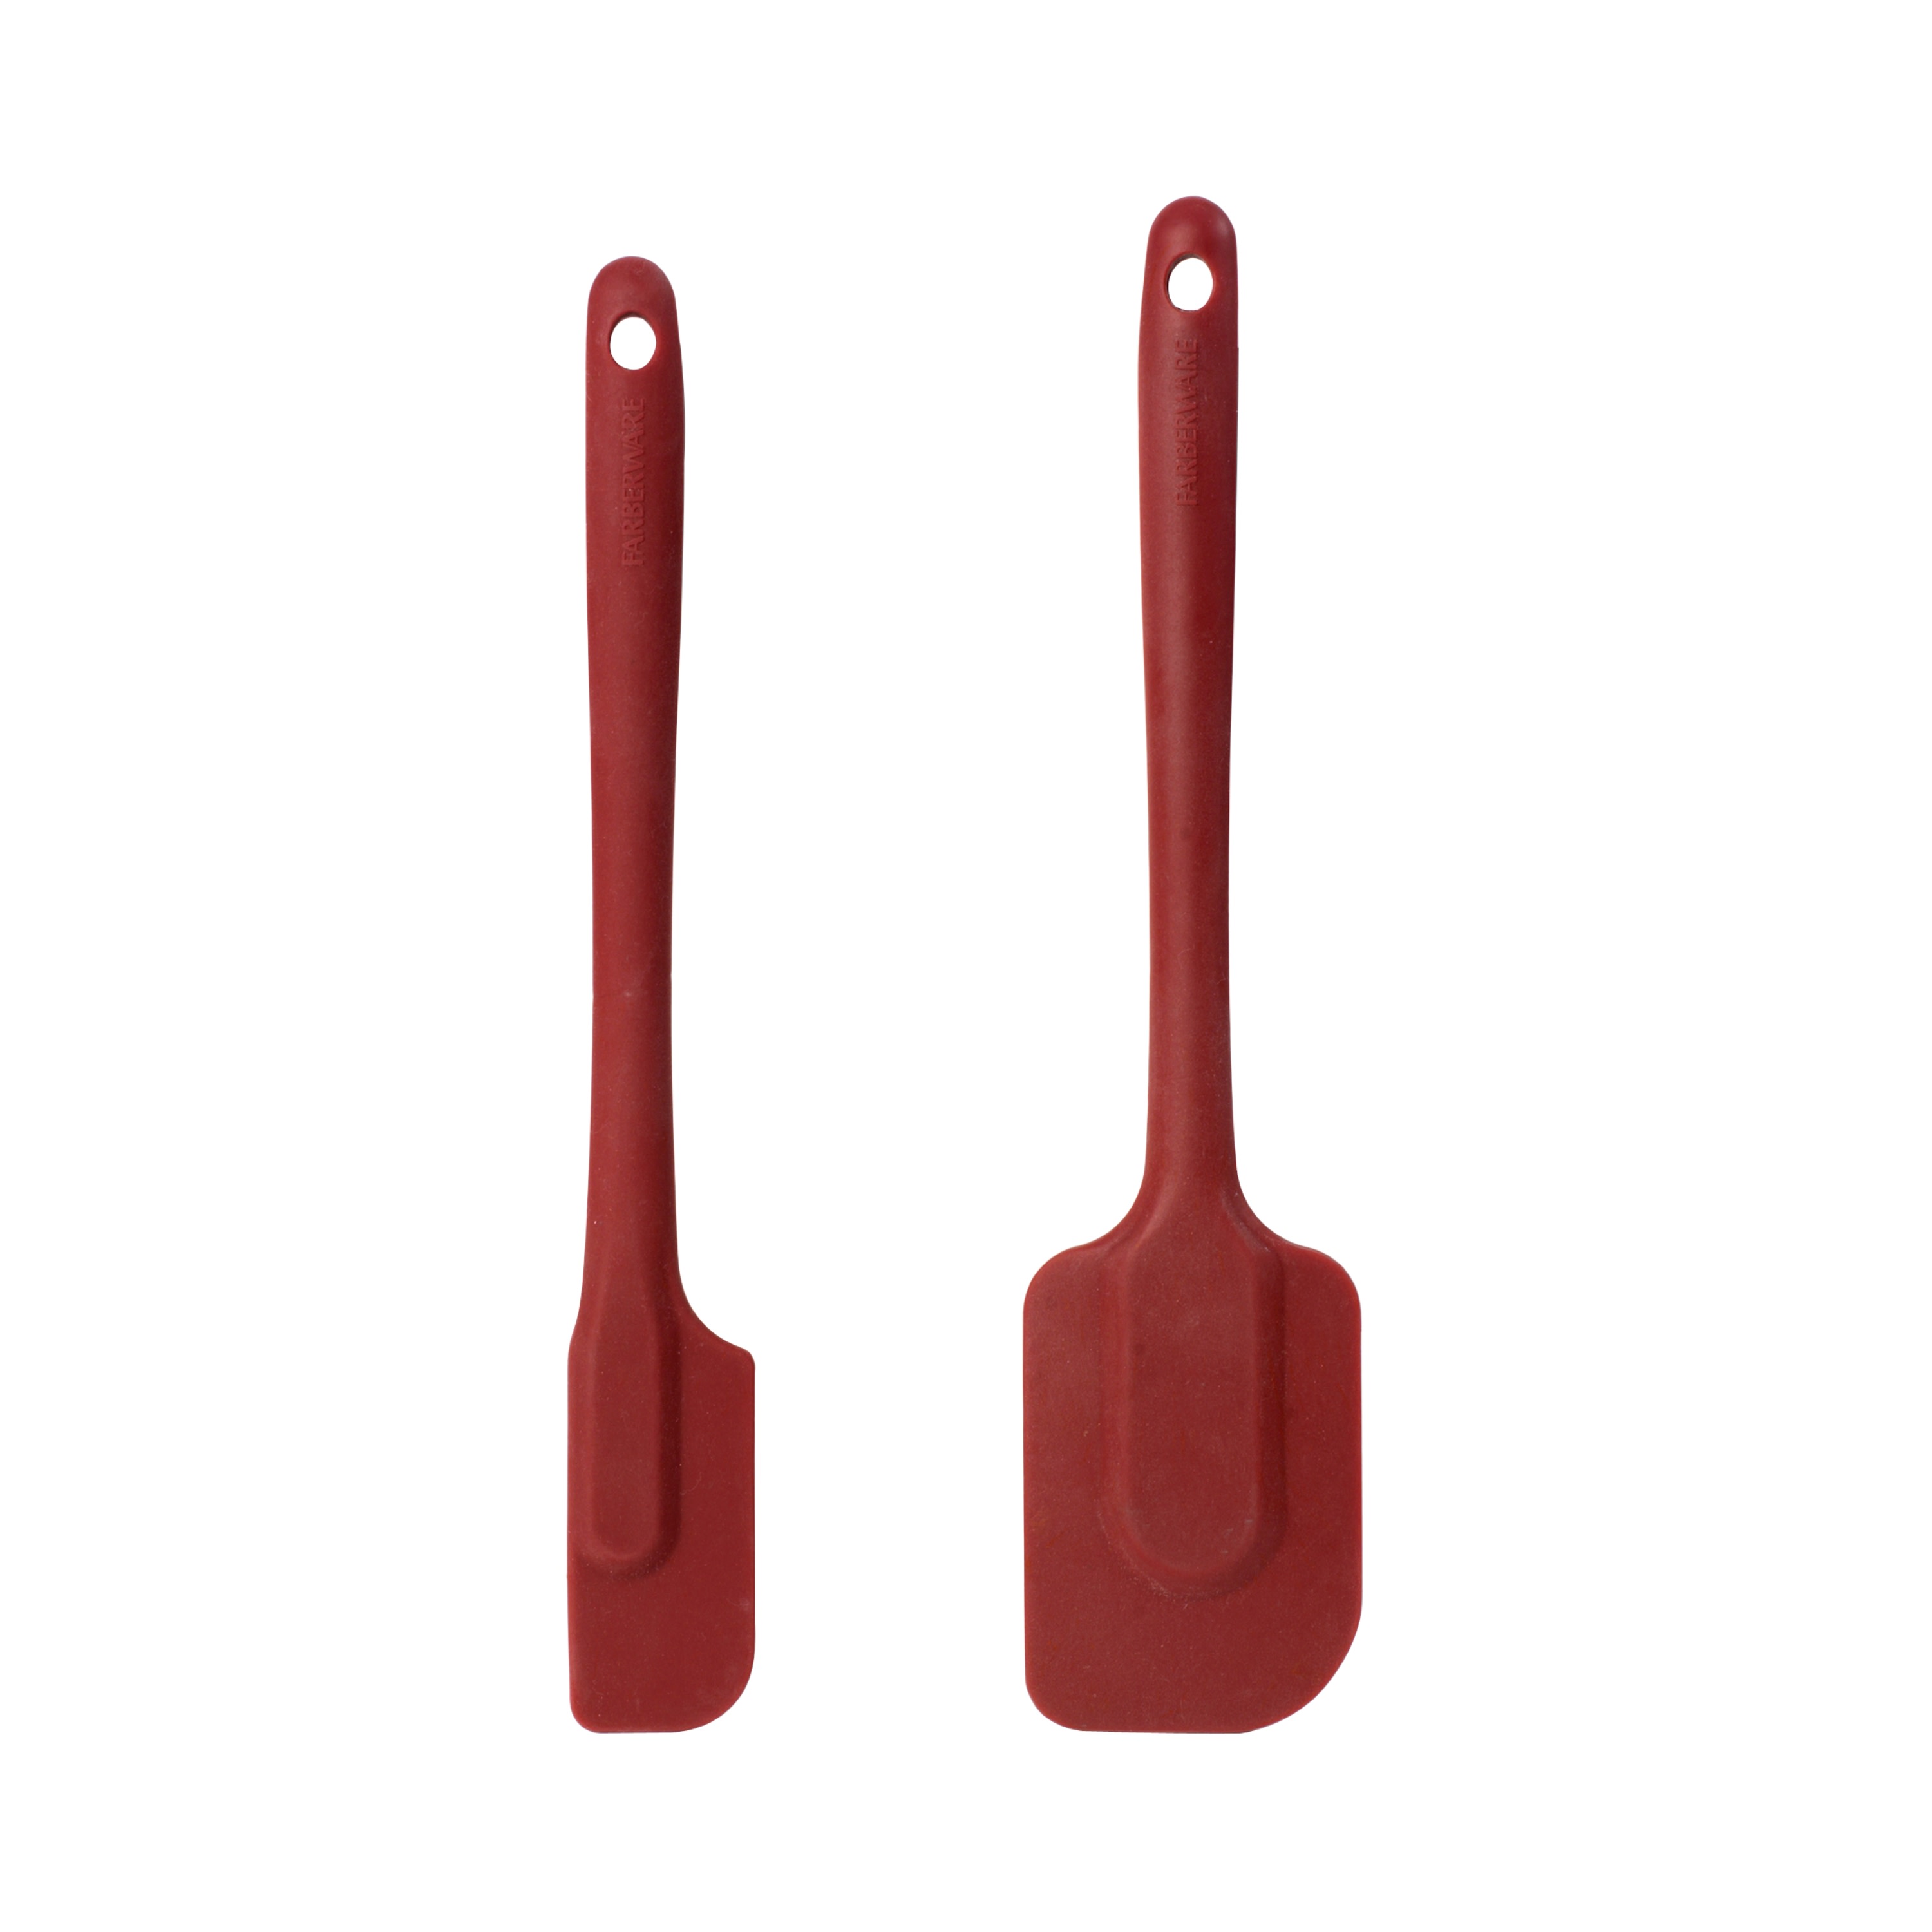 Farberware Professional Silicone Solid Red Spatula Set of 2 - image 1 of 10